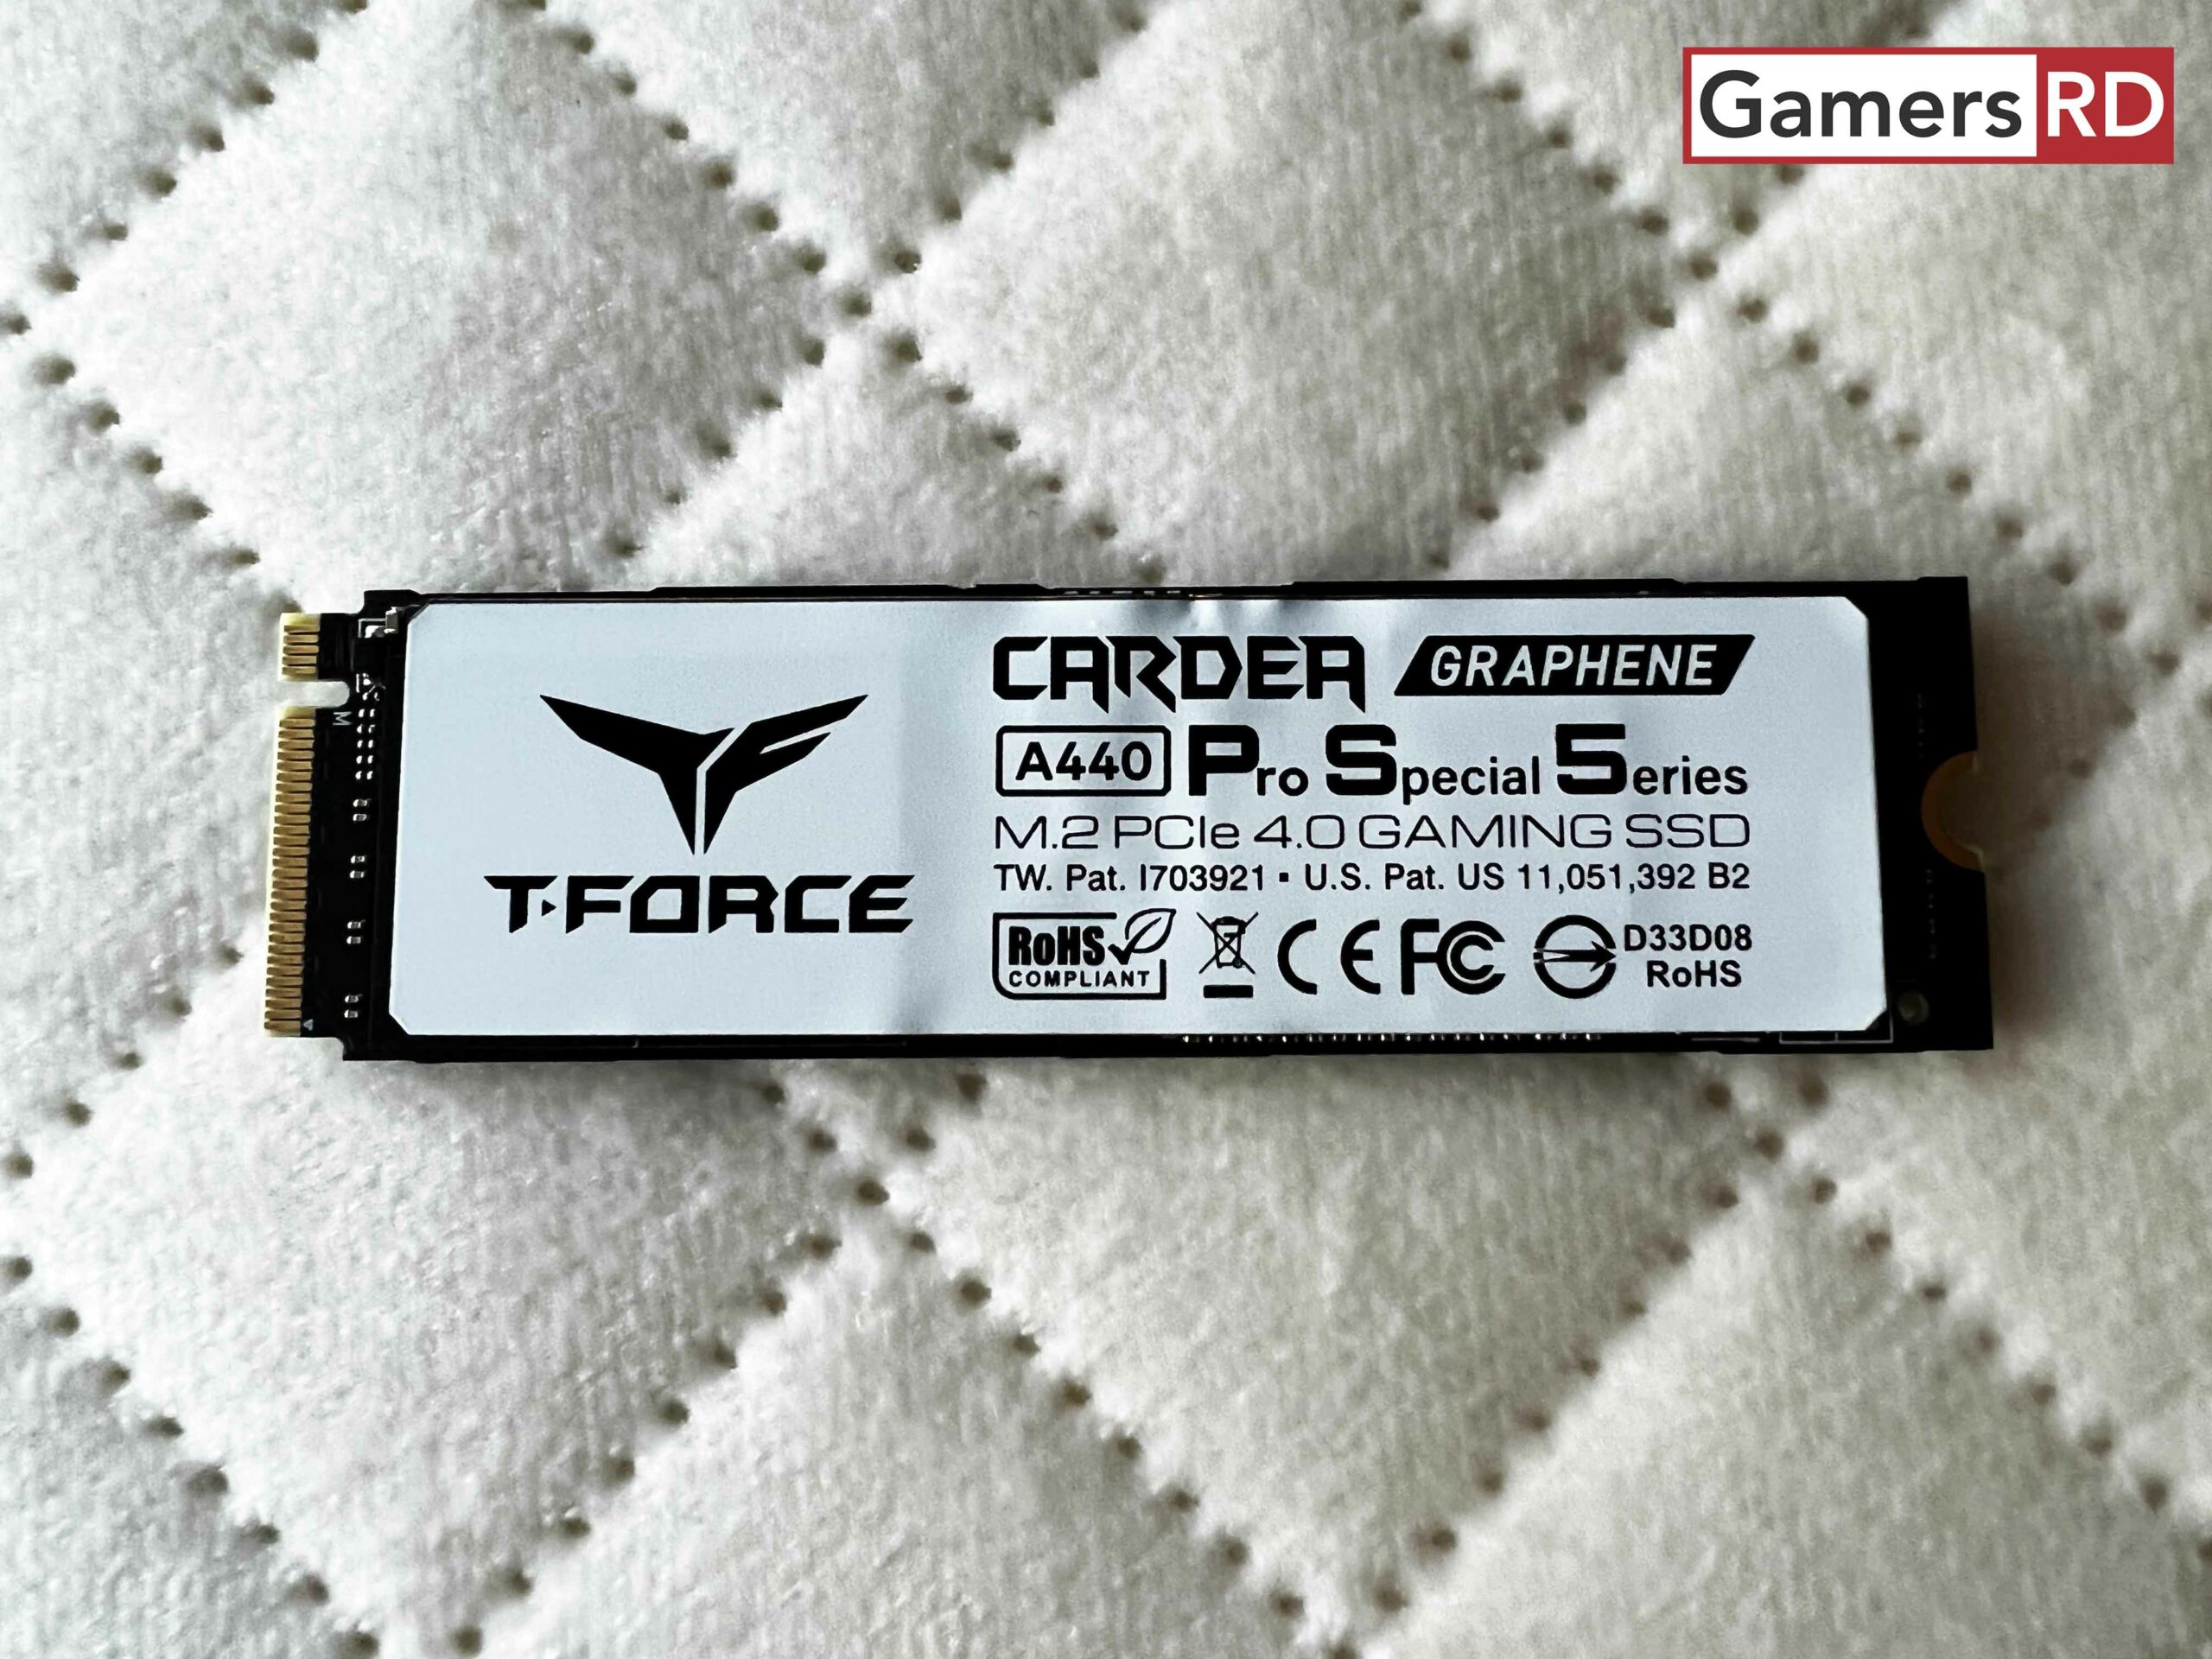 TEAMGROUP T-FORCE CARDEA A440 Pro Special Series SSD M.2 PS5 Review, 3 GamersRD